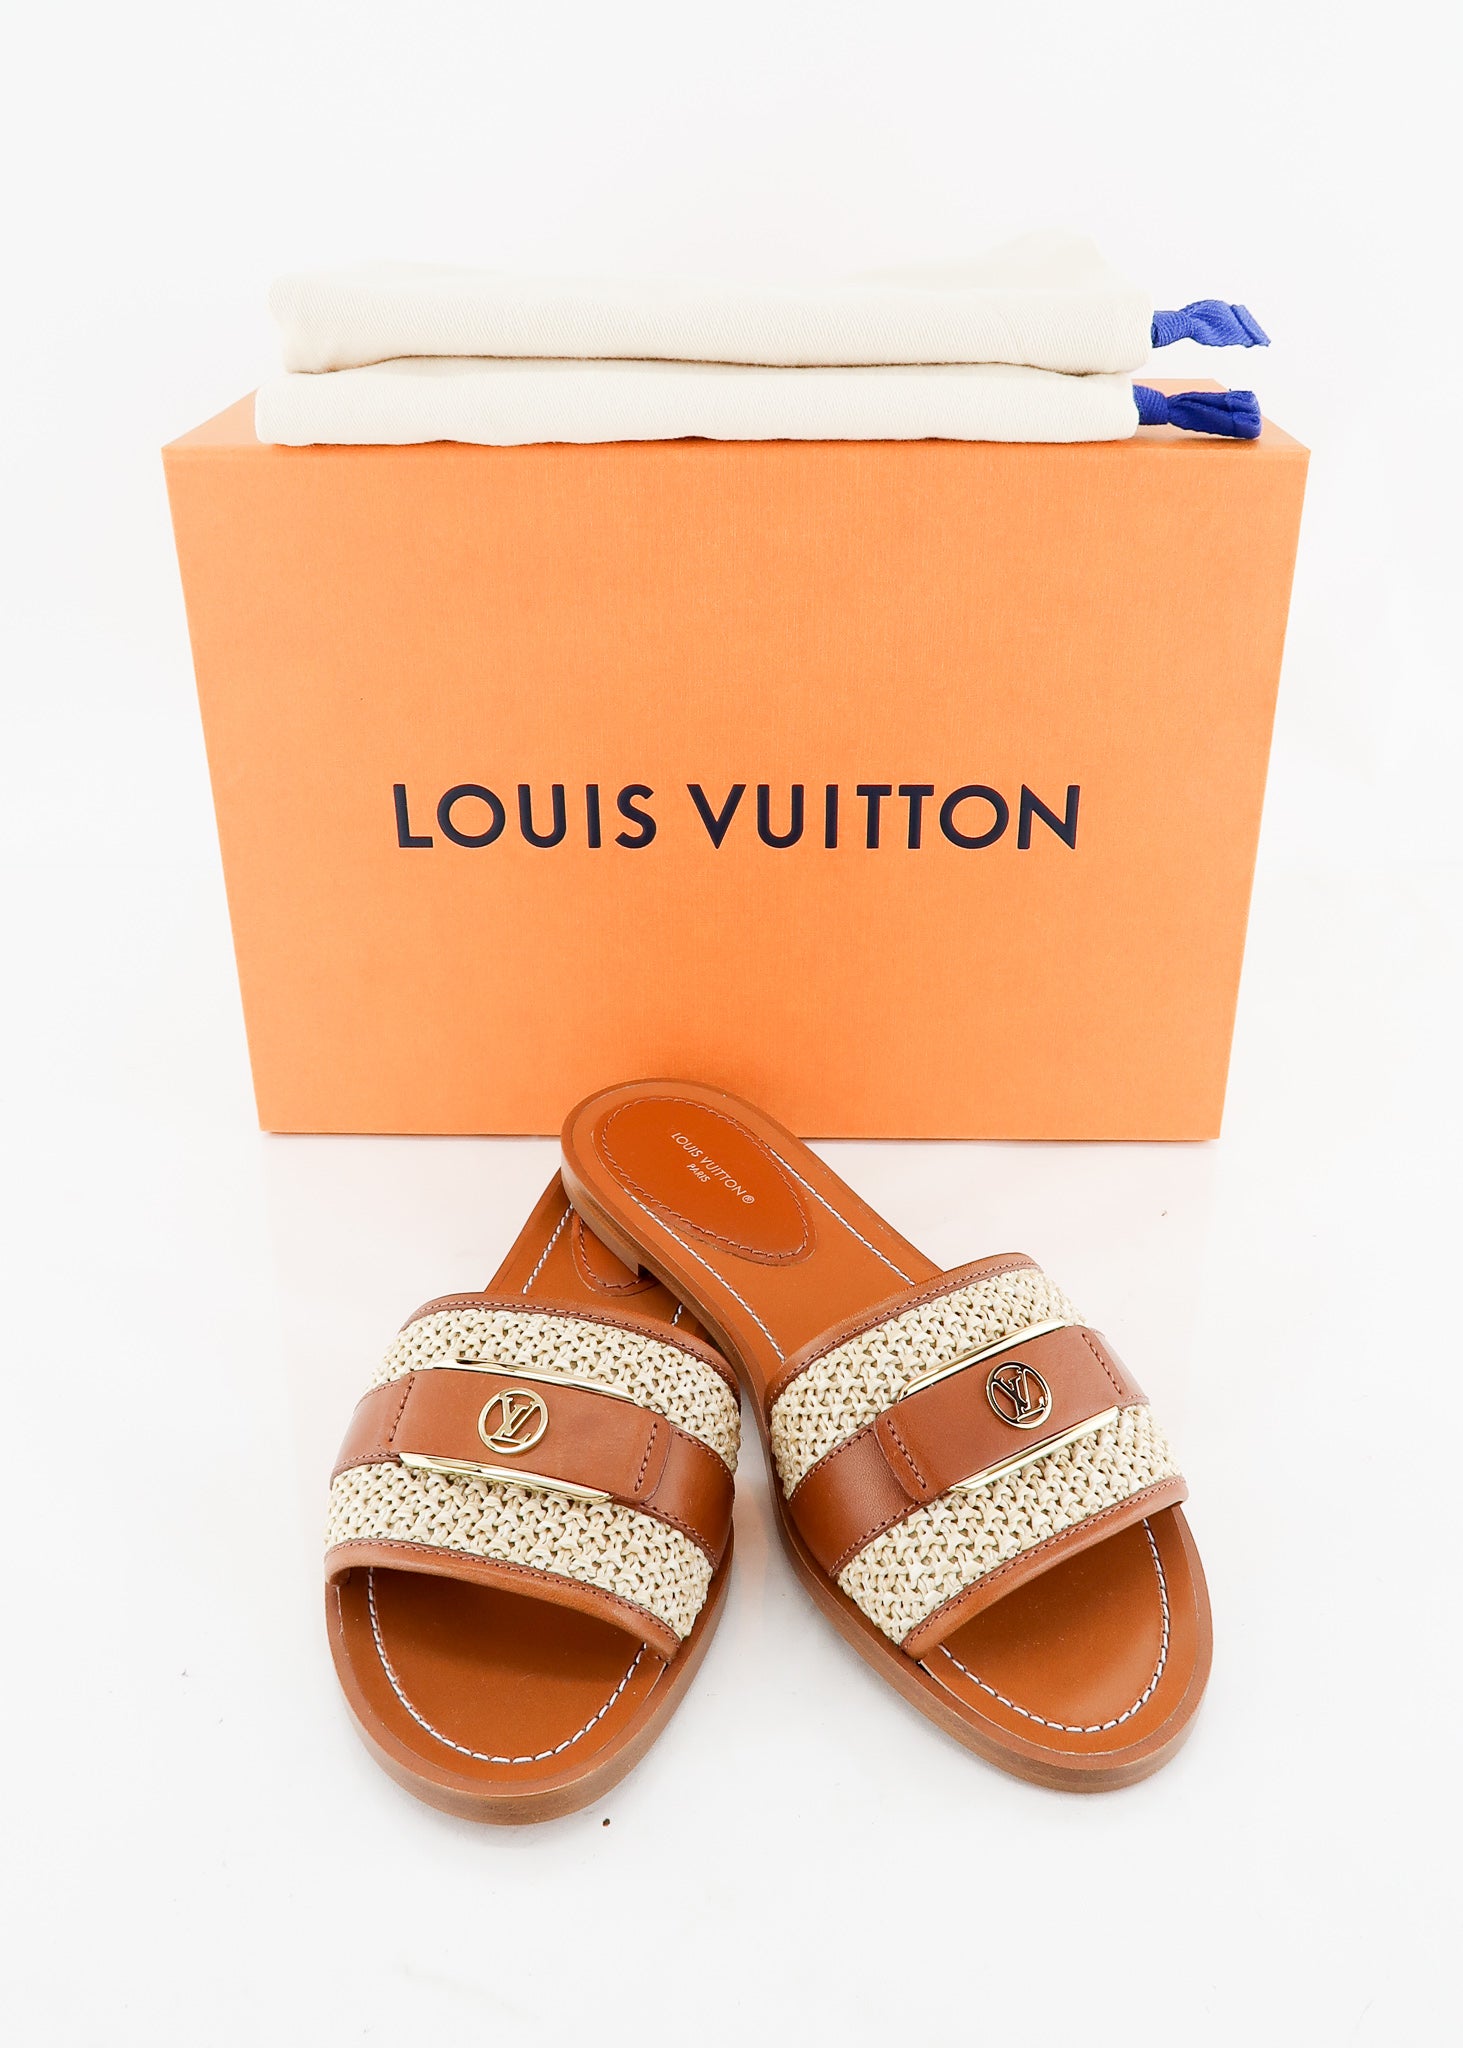 Louis Vuitton - Authenticated Lock It Sandal - Leather Brown for Women, Good Condition